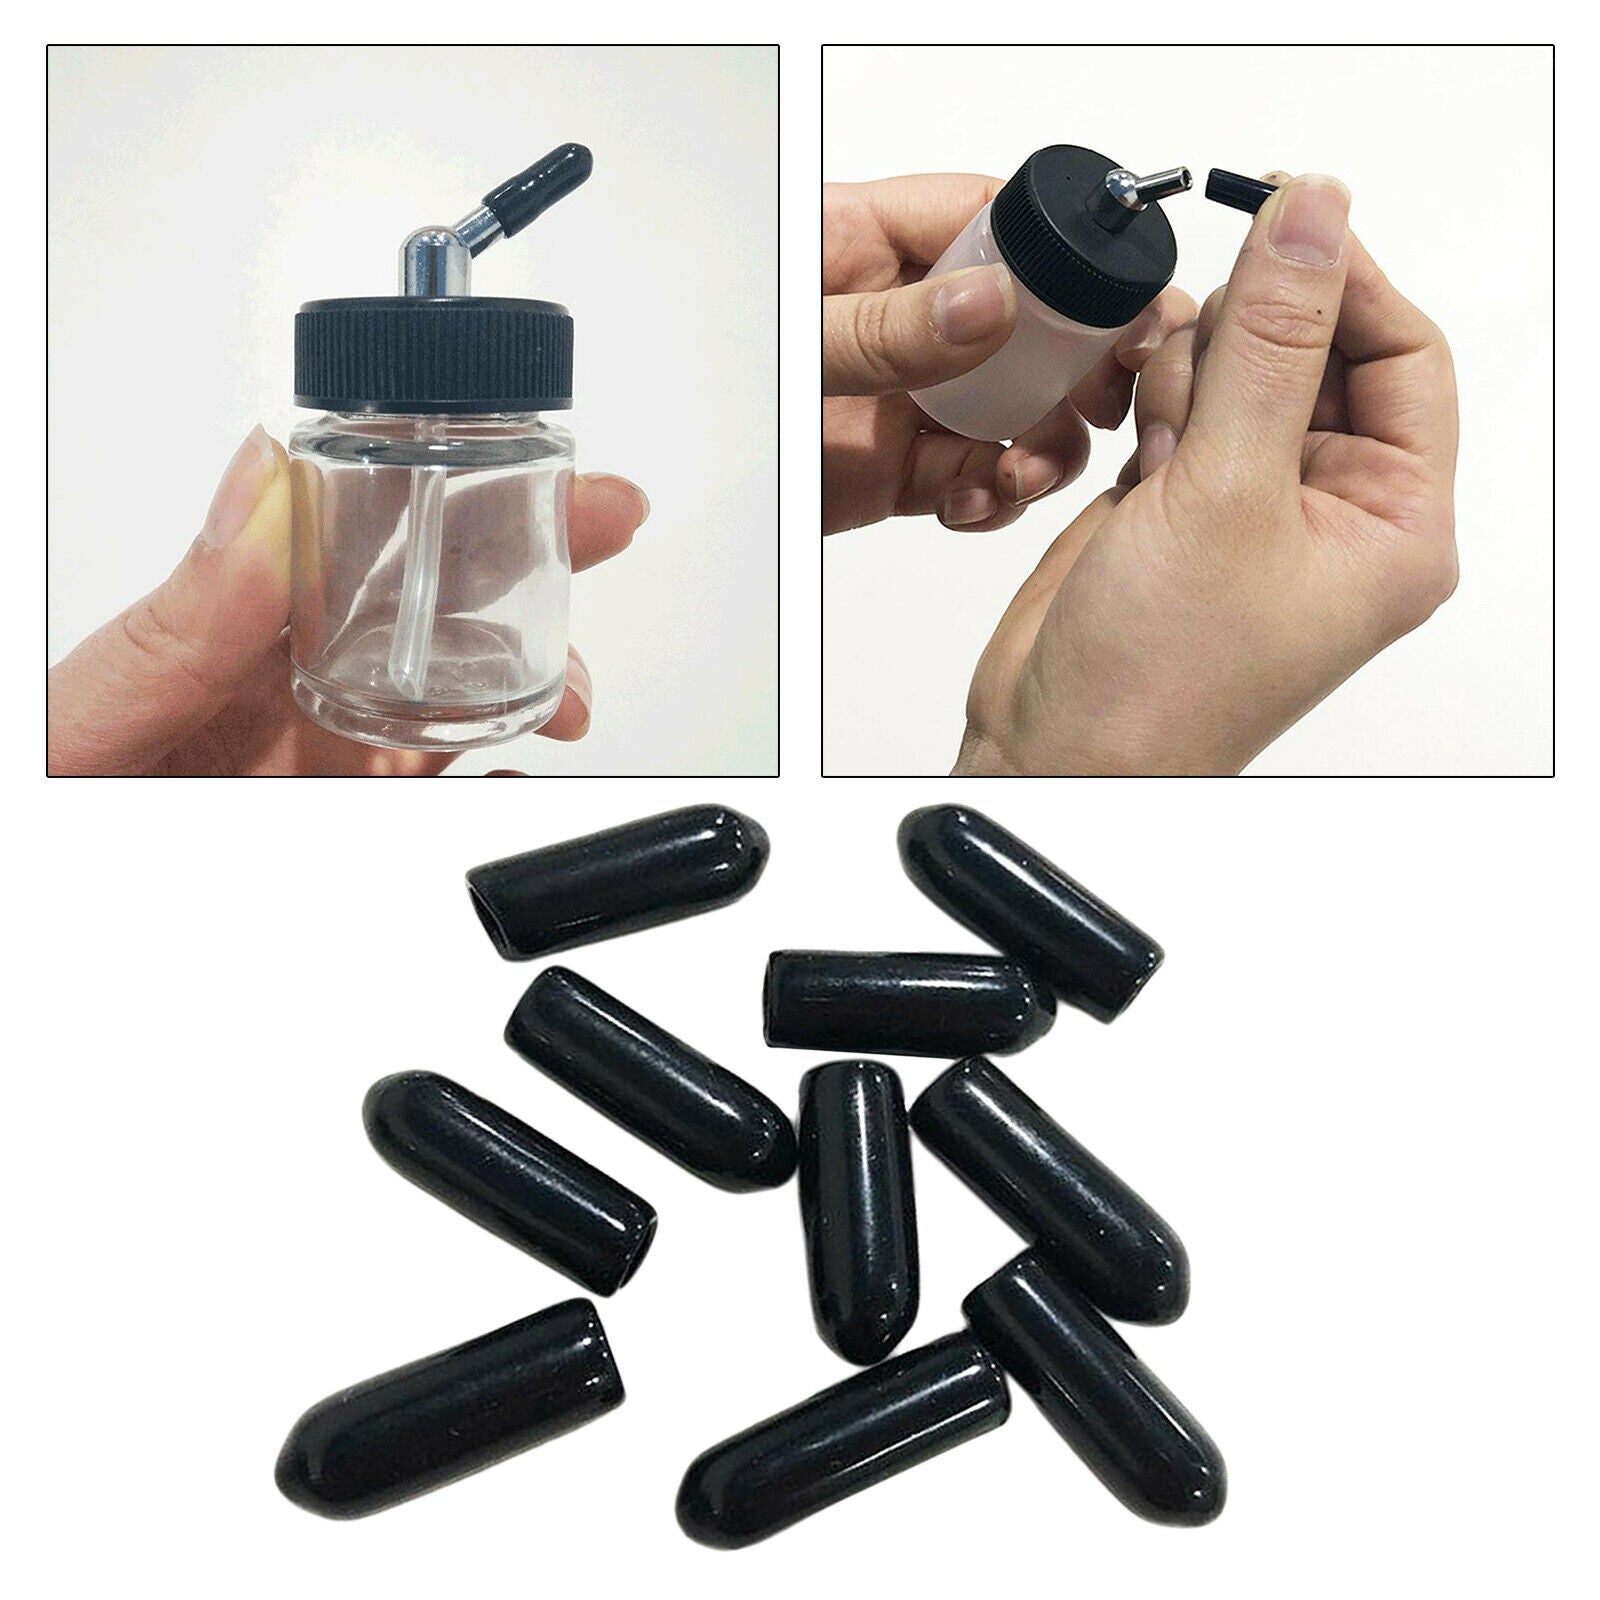 10x Airbrush Bottle Caps Pouring Covers Siphon Adapter Spout Covers